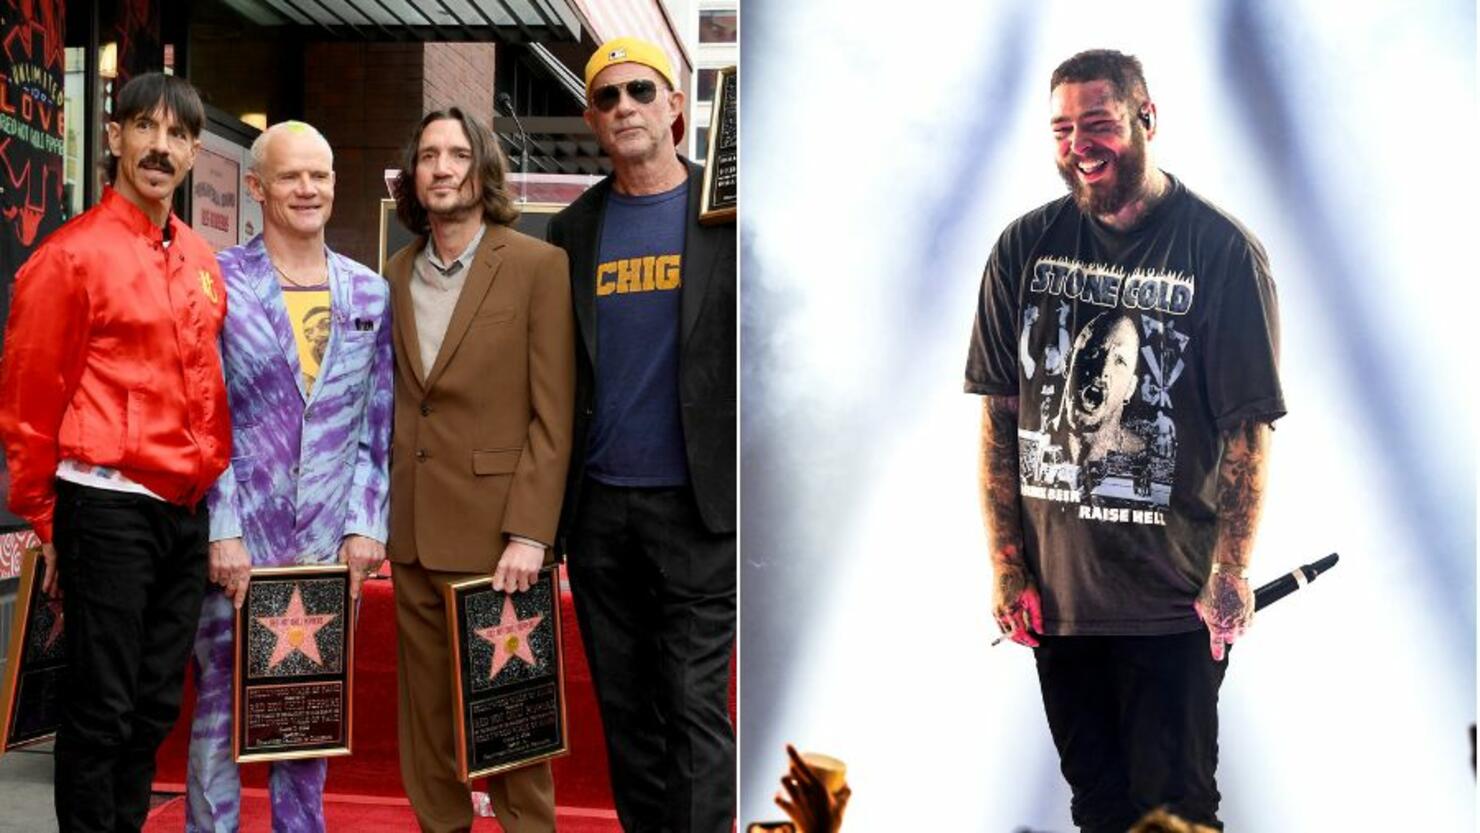 Red Chili Peppers Team Up With Post Malone For Special Stadium Tour | iHeart